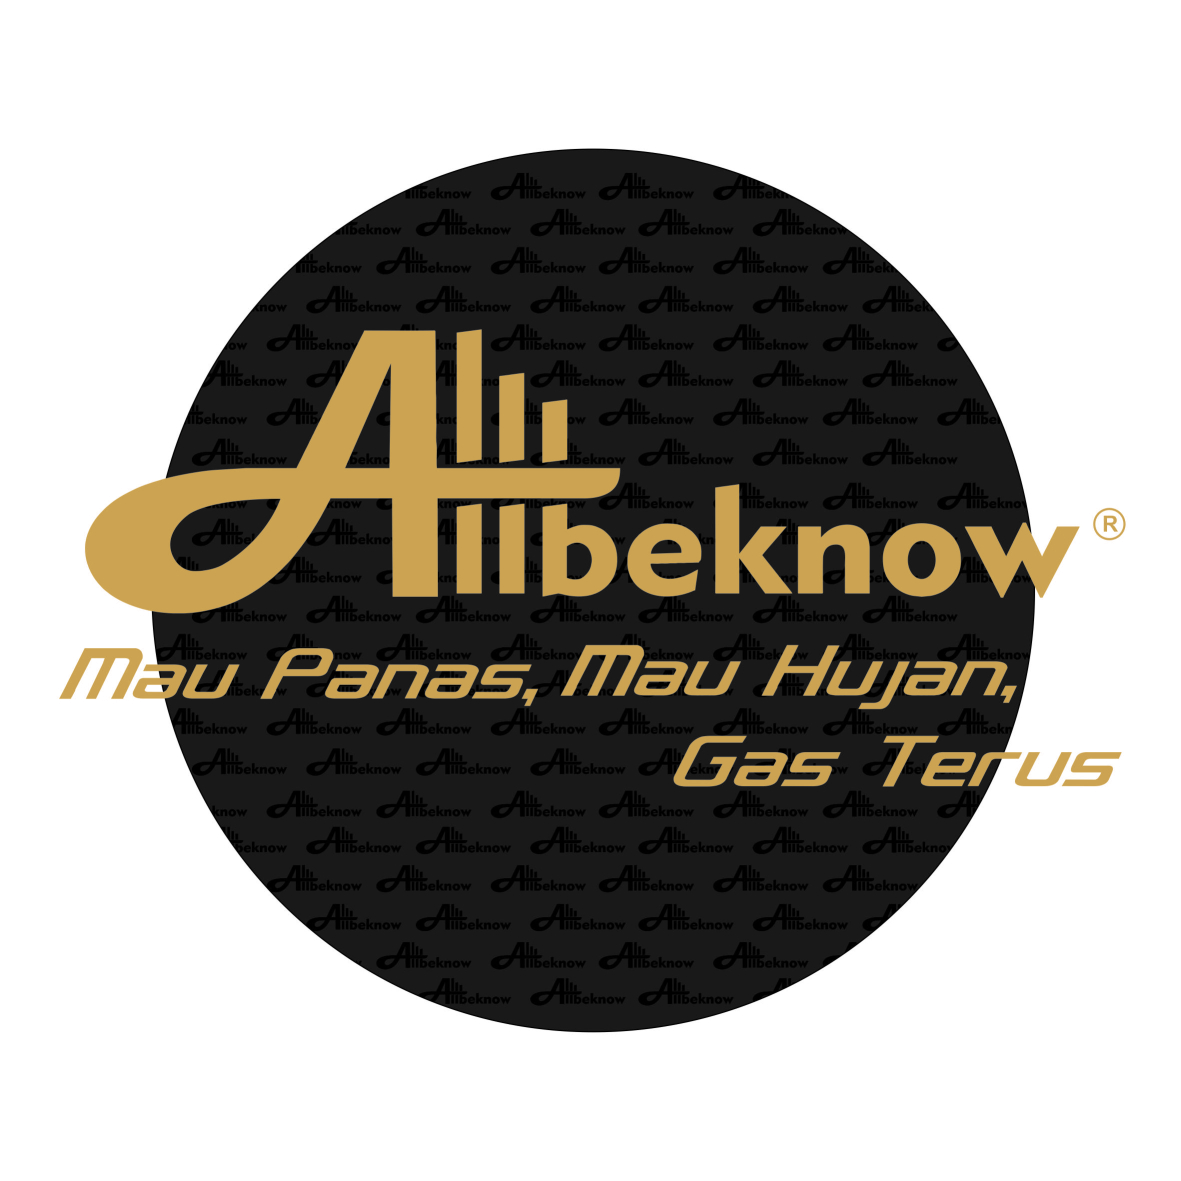 Allbeknow Official Store